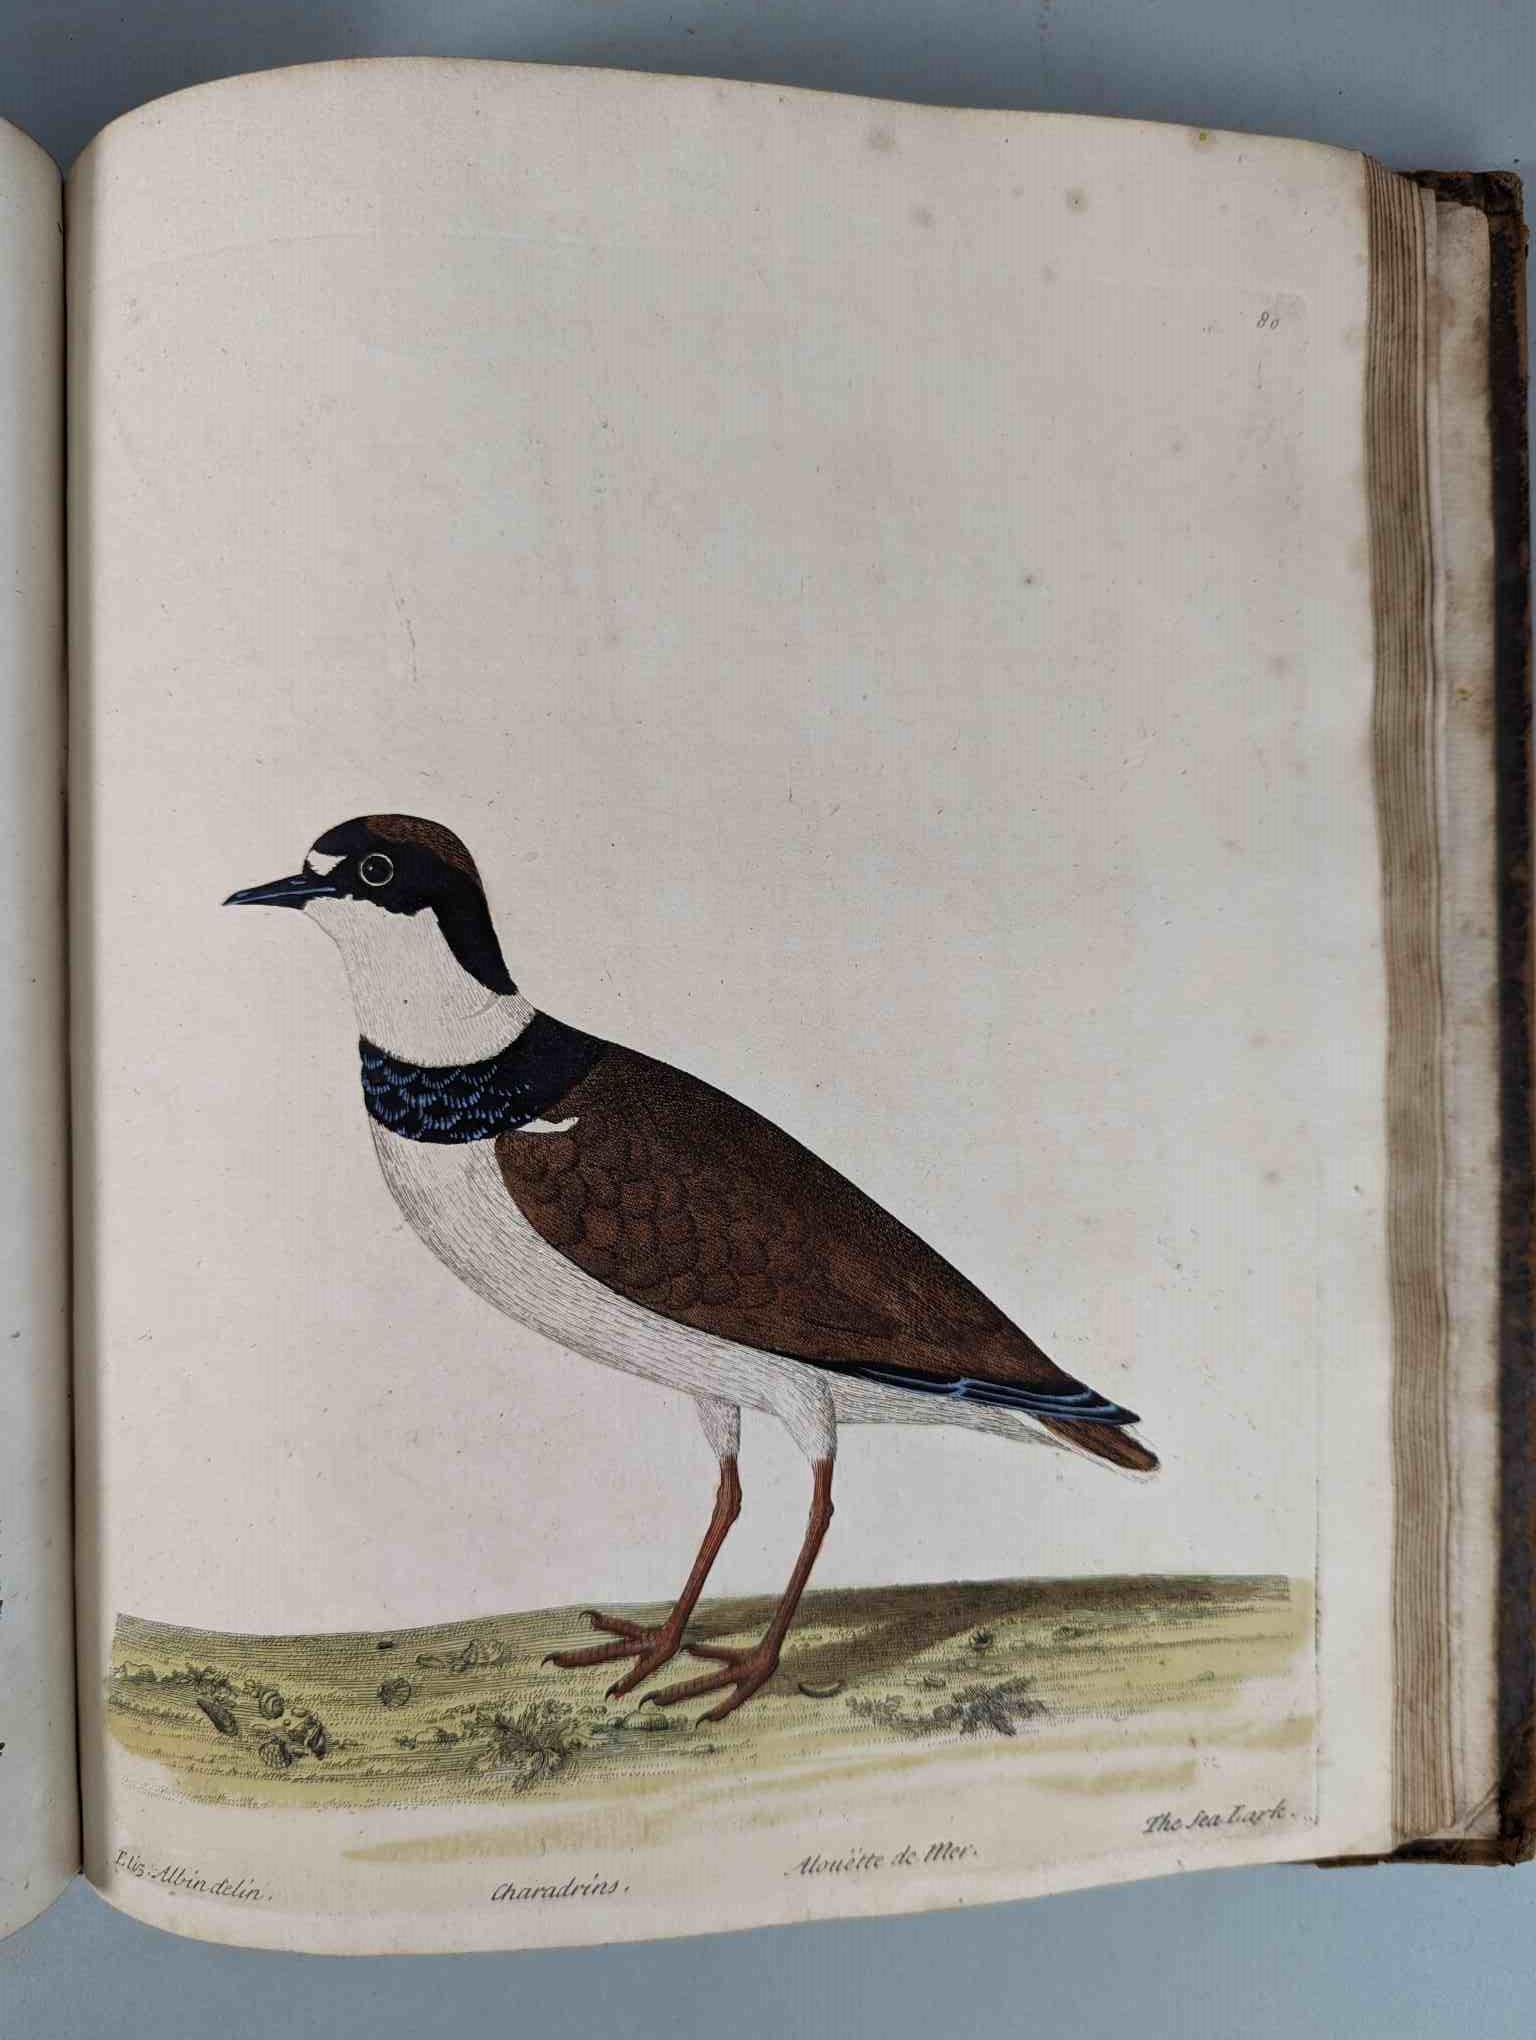 ALBIN, Eleazar. A Natural History of Birds, to which are added, Notes and Observations by W. - Image 83 of 208